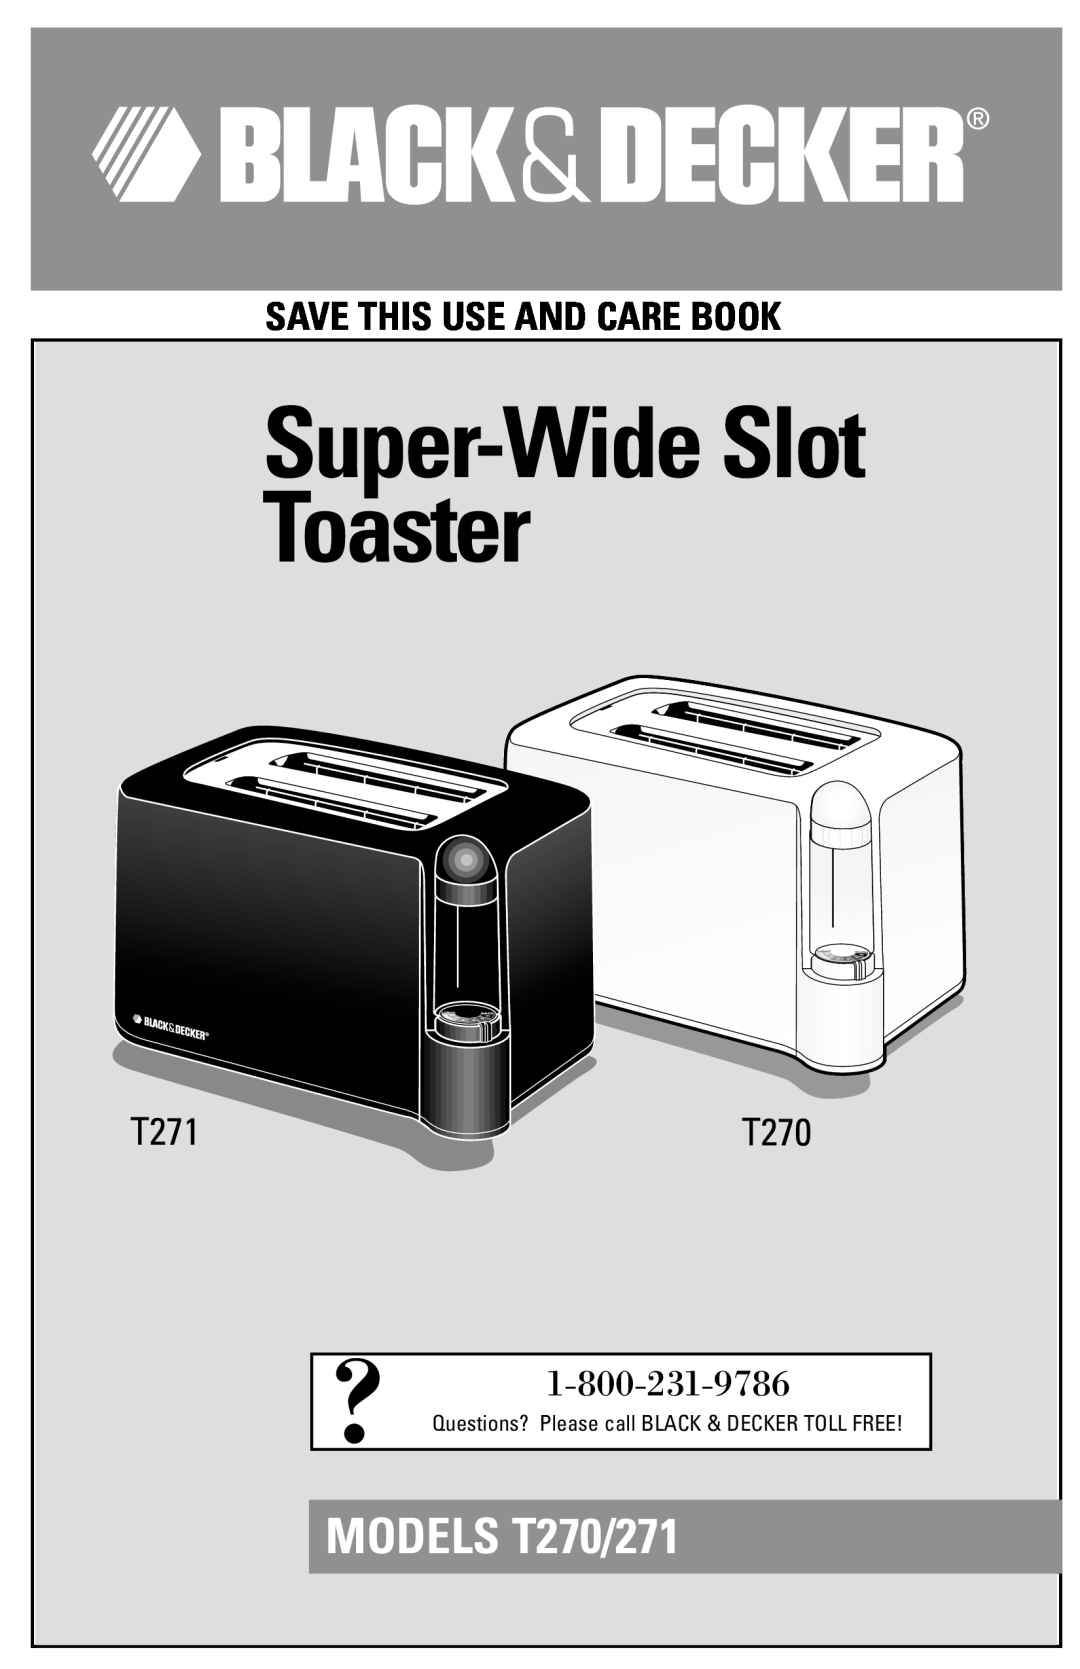 Black & Decker manual Super-WideSlot Toaster, MODELS T270/271, Save This Use And Care Book, T271 